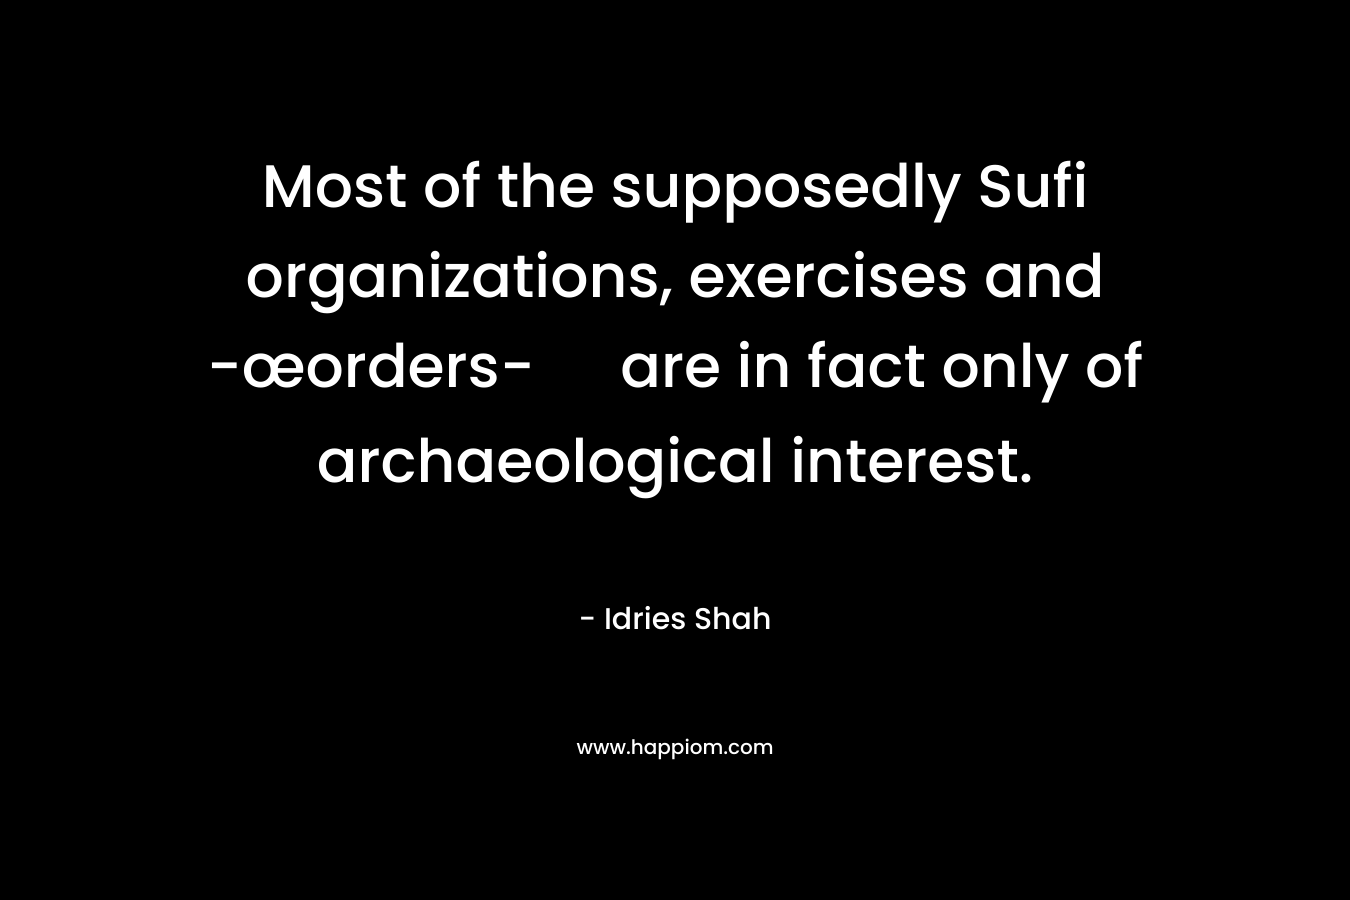 Most of the supposedly Sufi organizations, exercises and -œorders- are in fact only of archaeological interest.